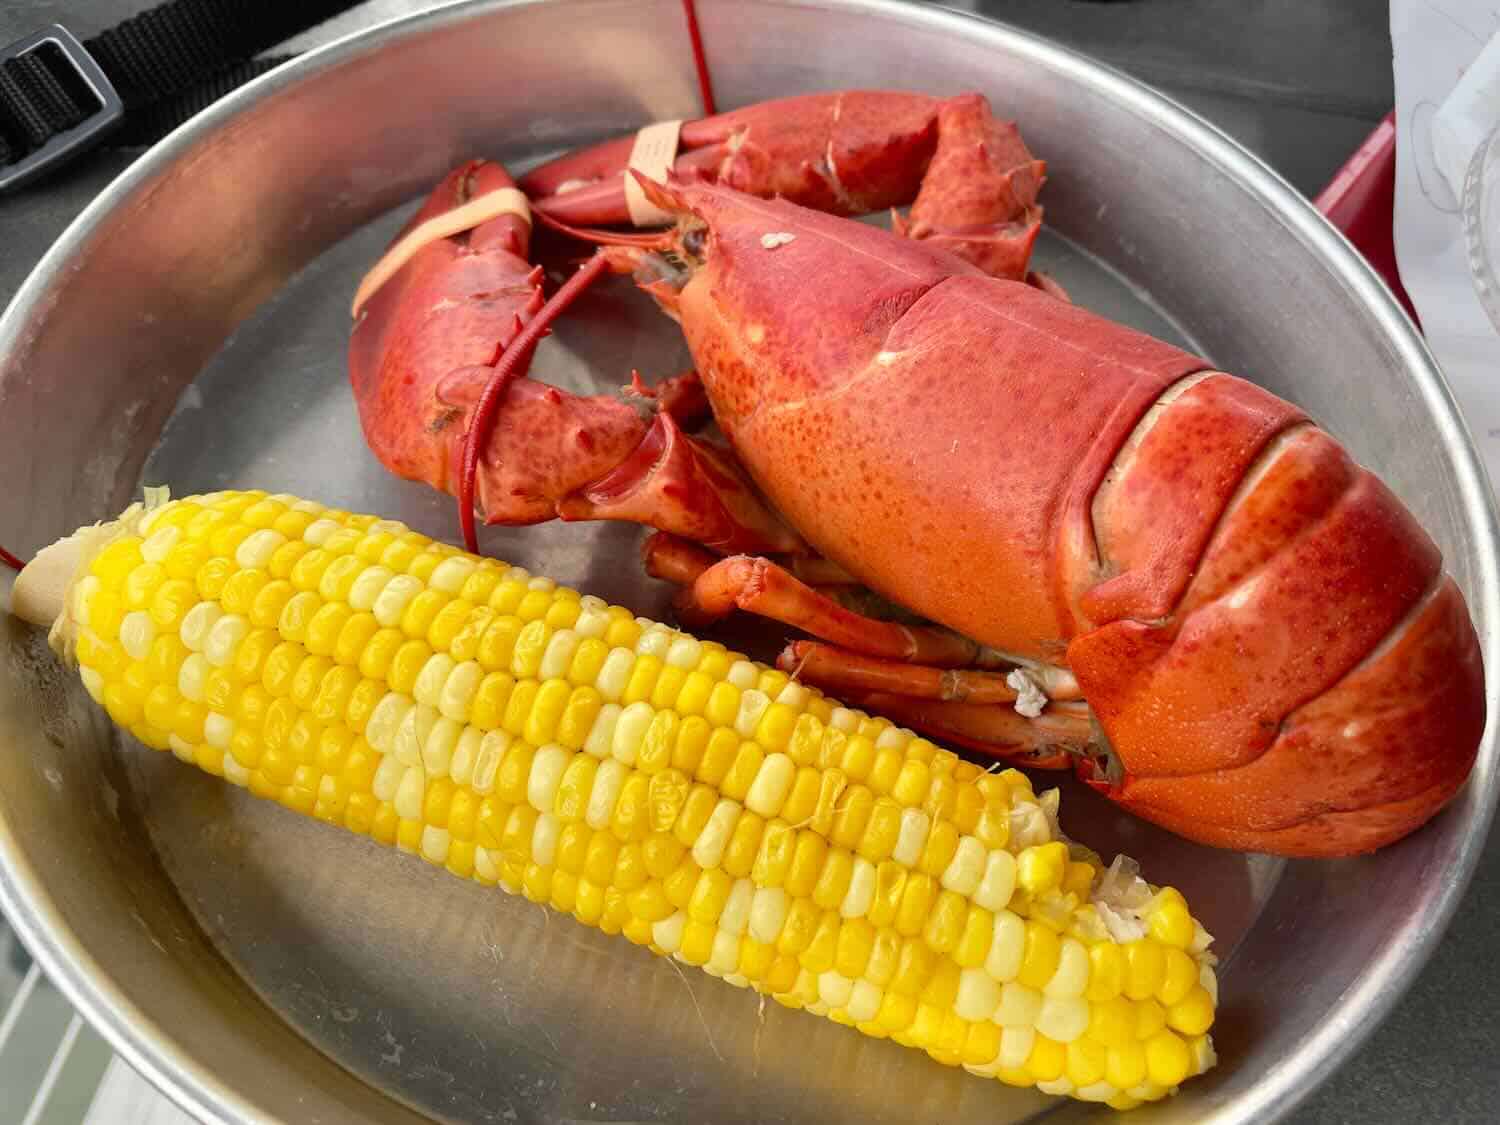 A silver metal plate holds a large orange lobster and one yellow corn on the cob at Thurston's Lobster Pond in Maine.